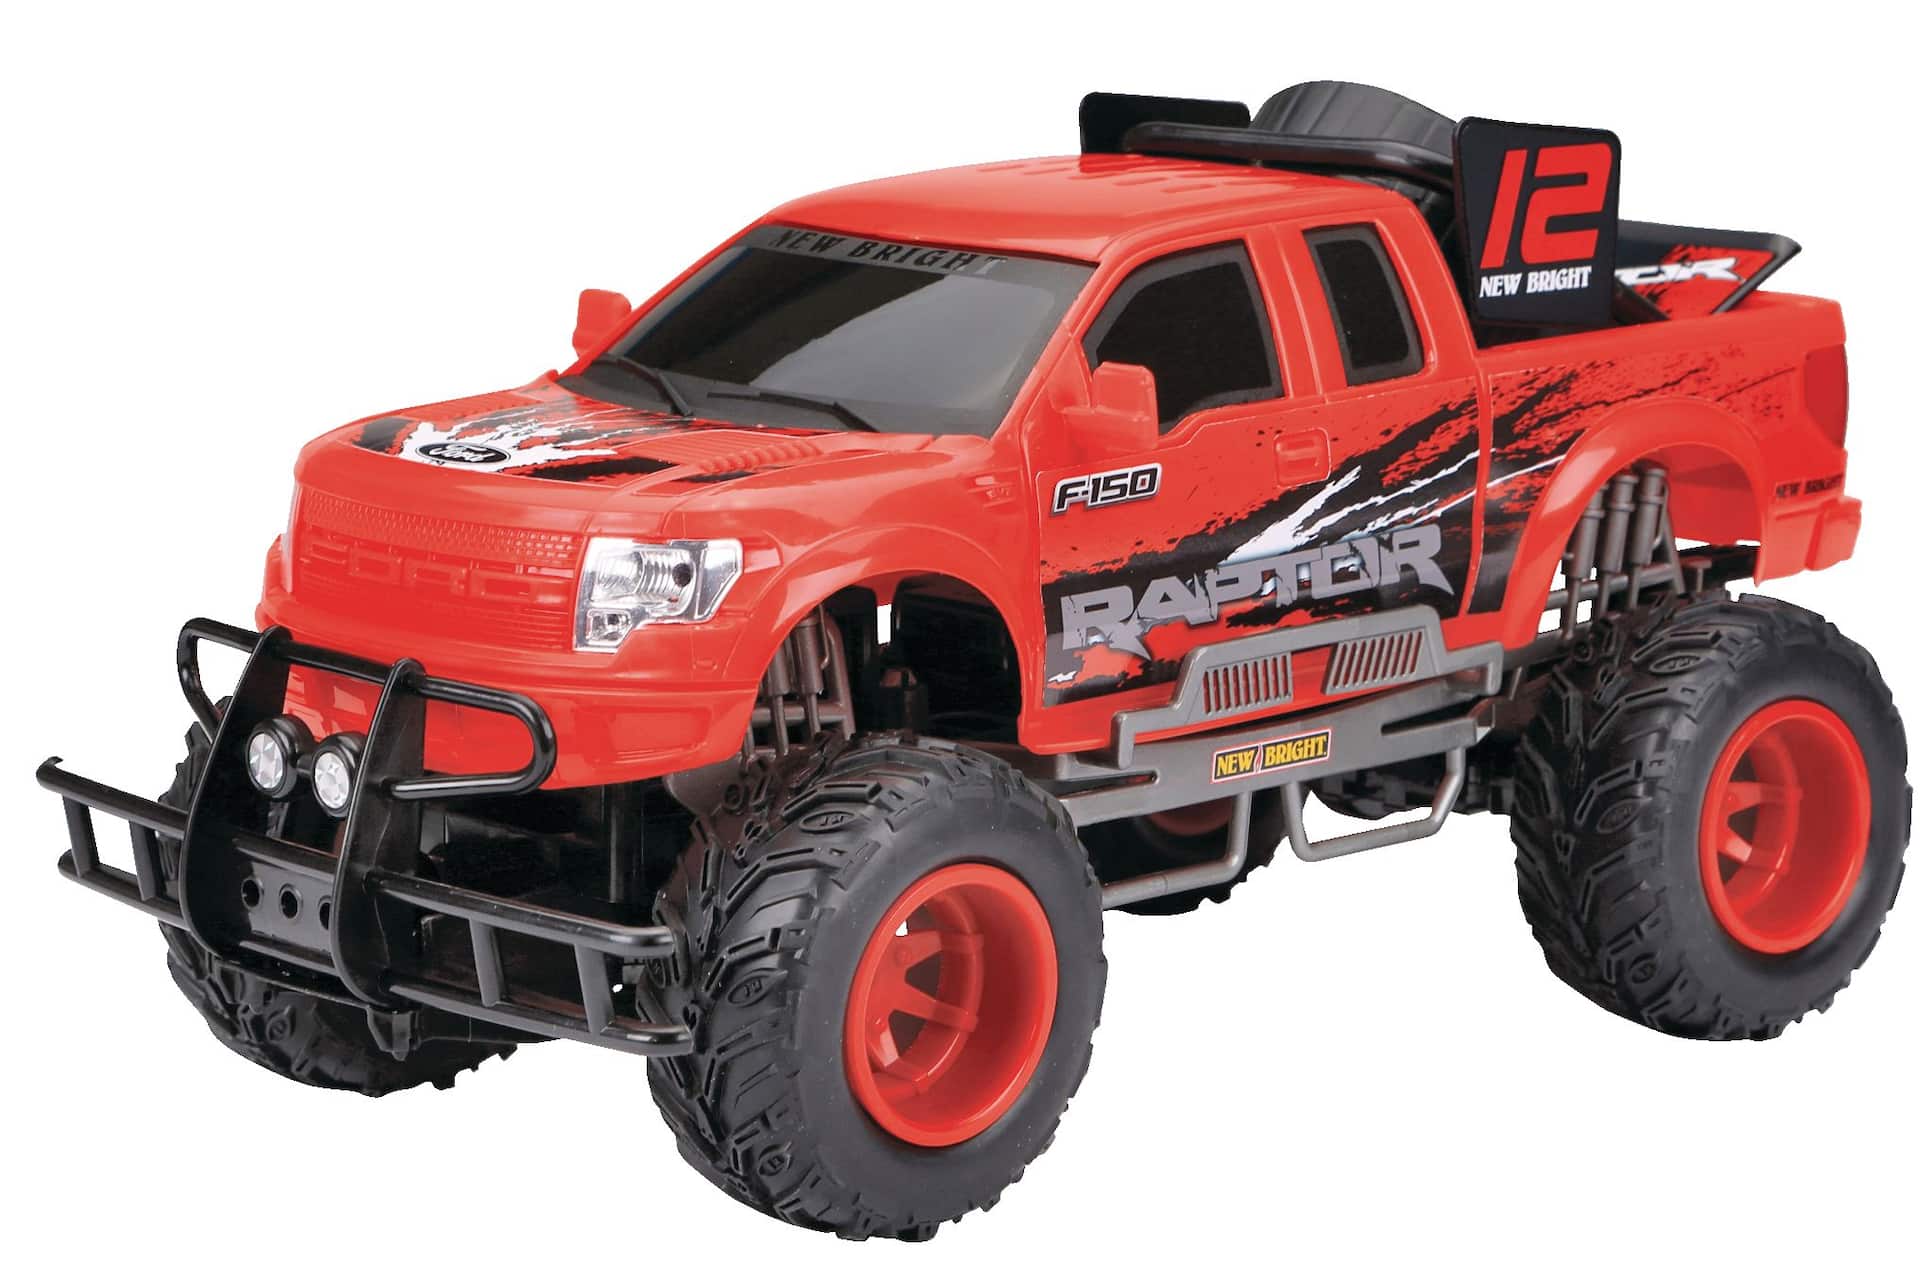 New Bright 1:10 Scale Remote Controlled Raptor 4x4 Truck, Ages 6+